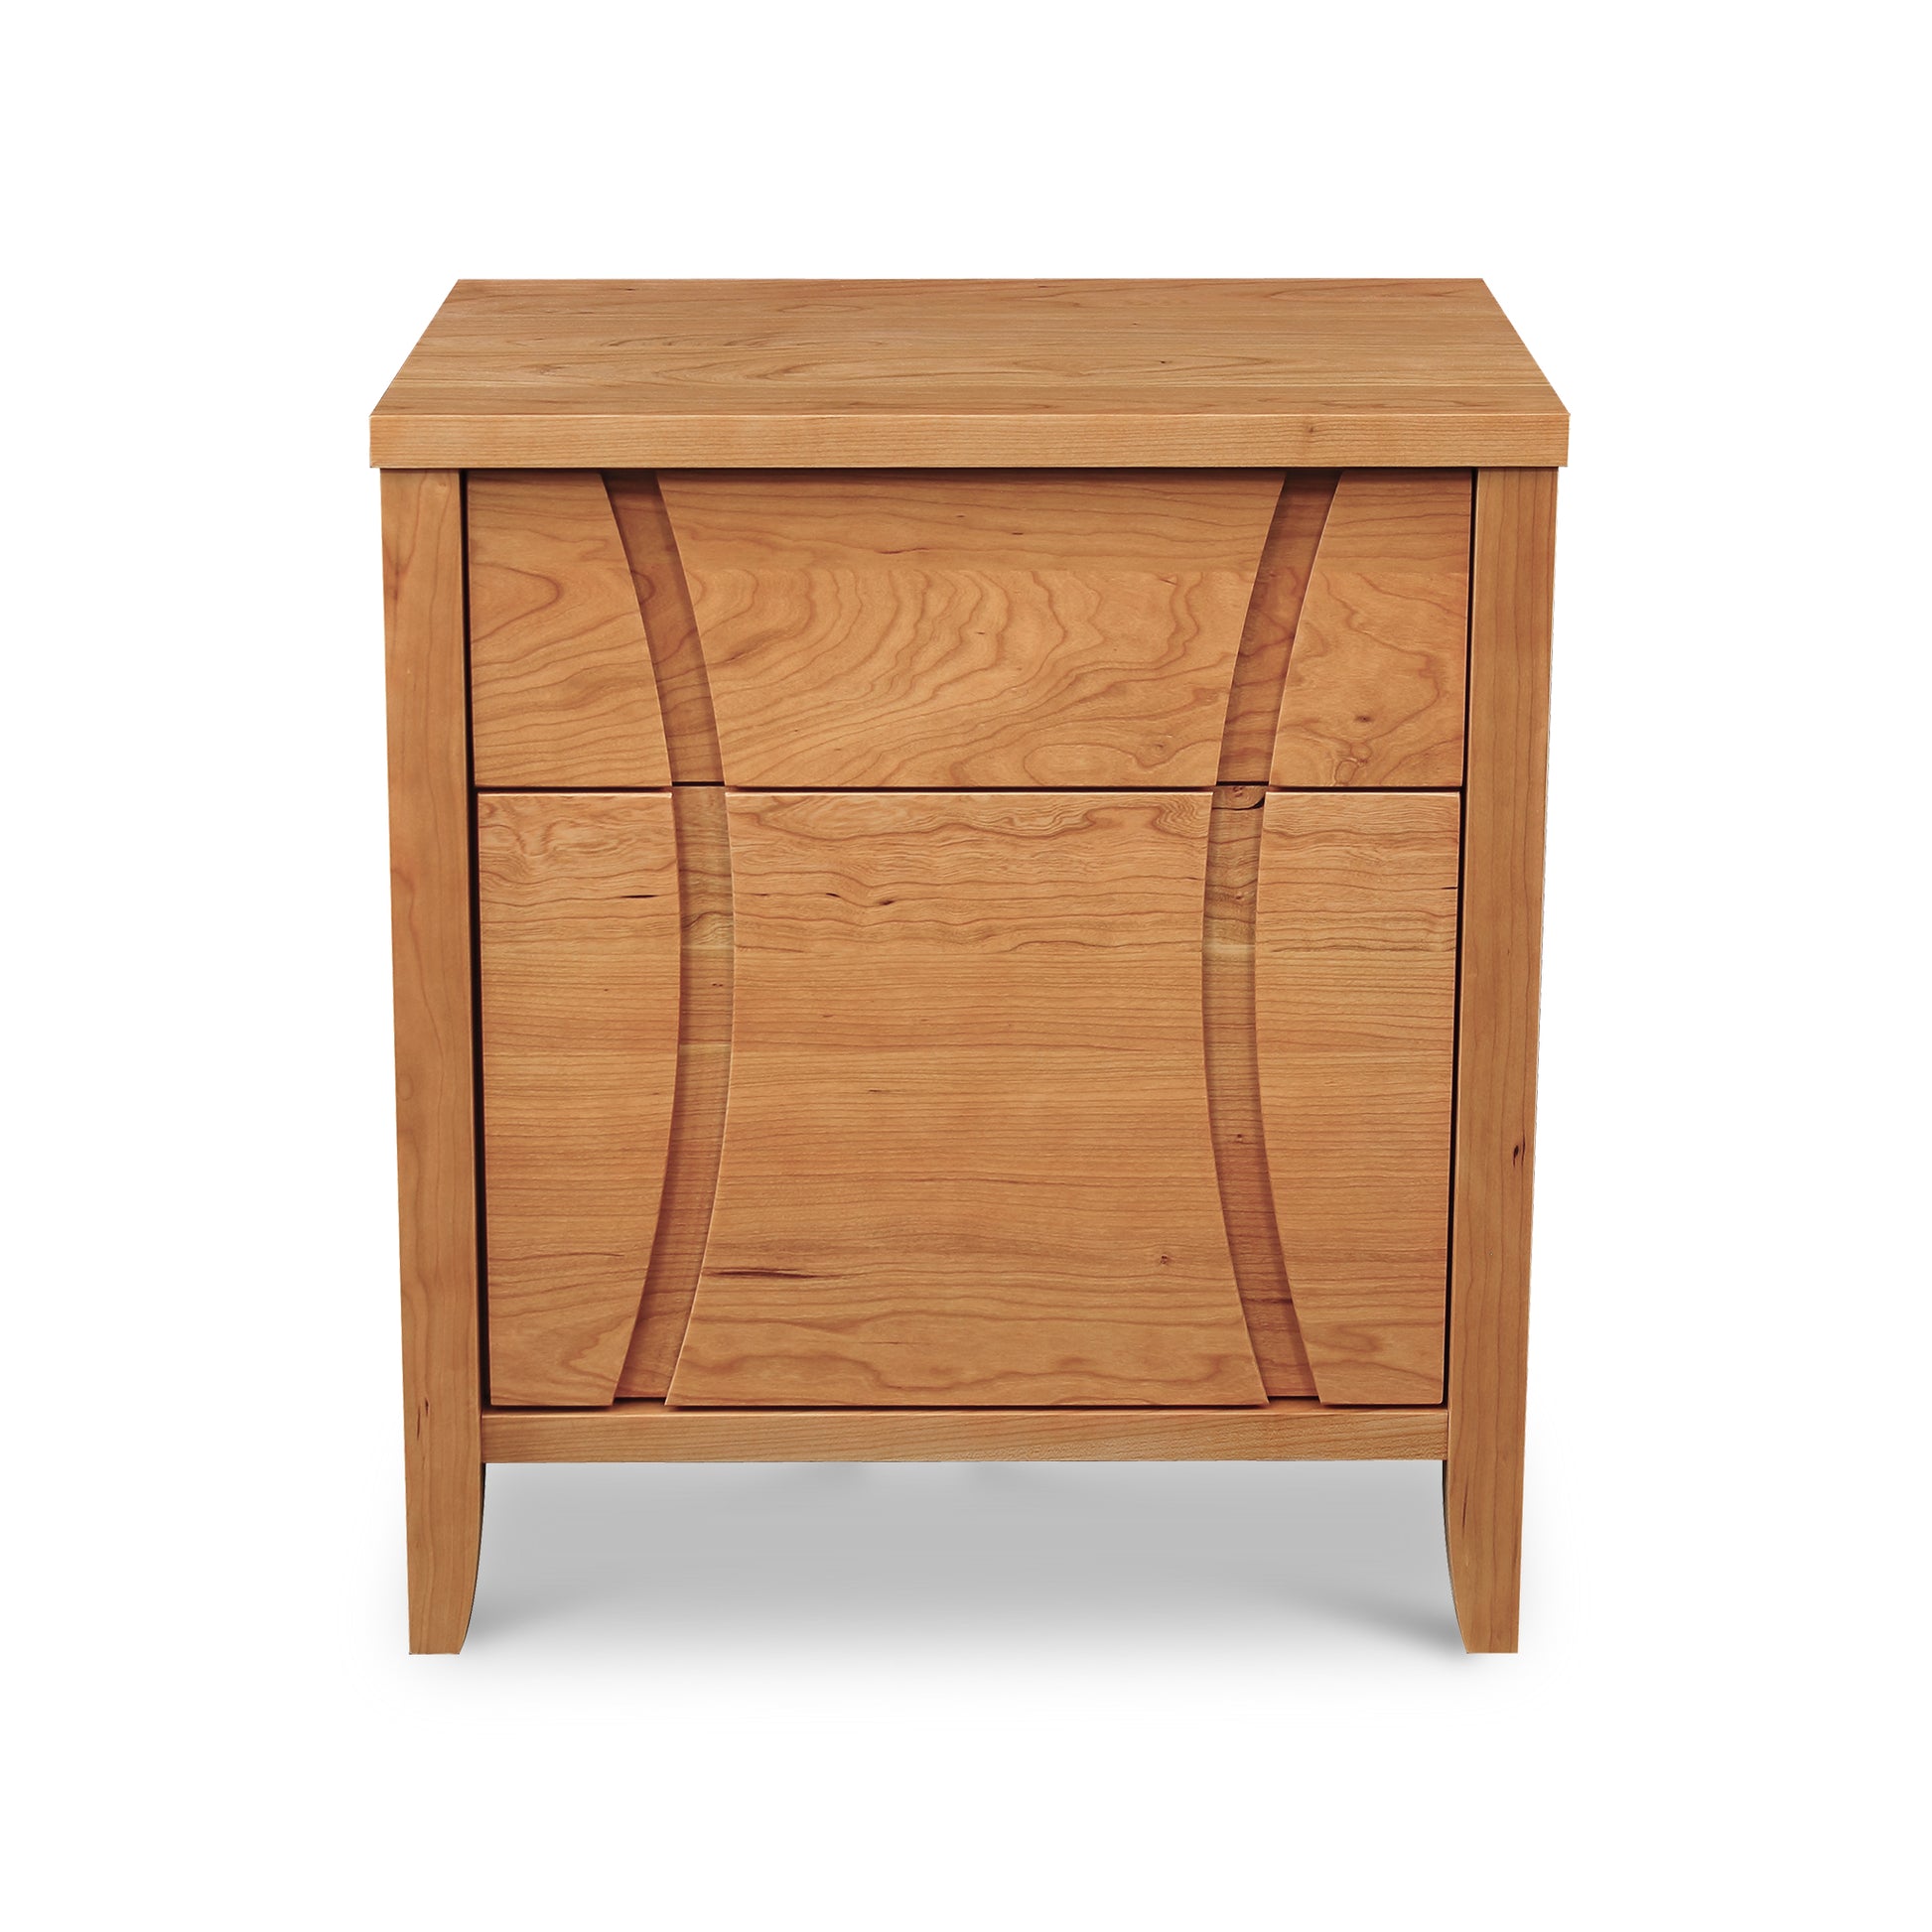 A Holland 1-Drawer Nightstand with Door from Lyndon Furniture featuring a sleek design.